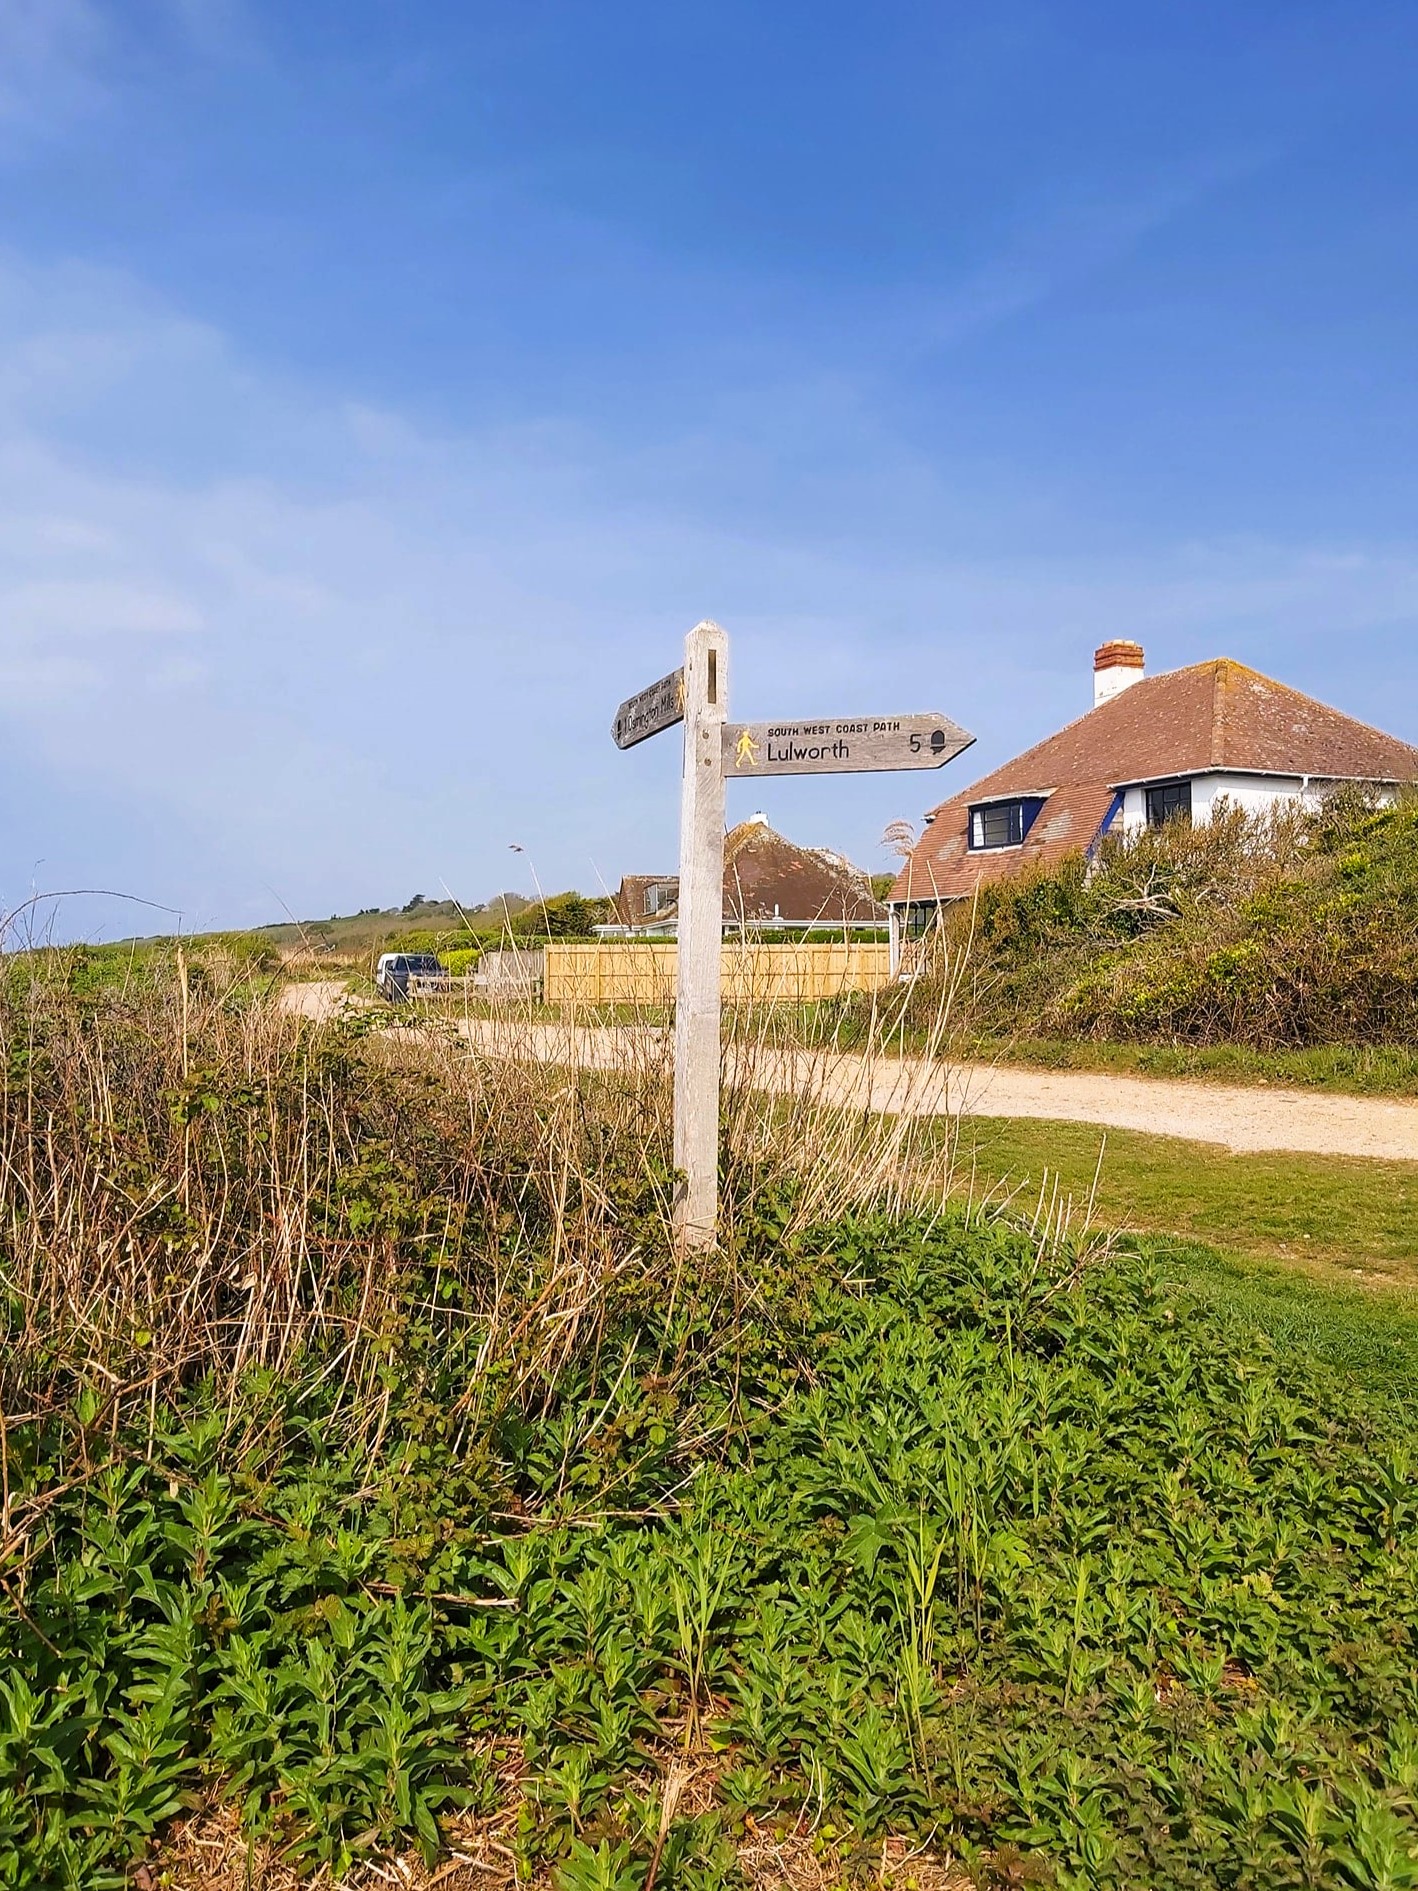 A signpost to Lulworth cove, seen at Ringstead Beach, Dorset, England.